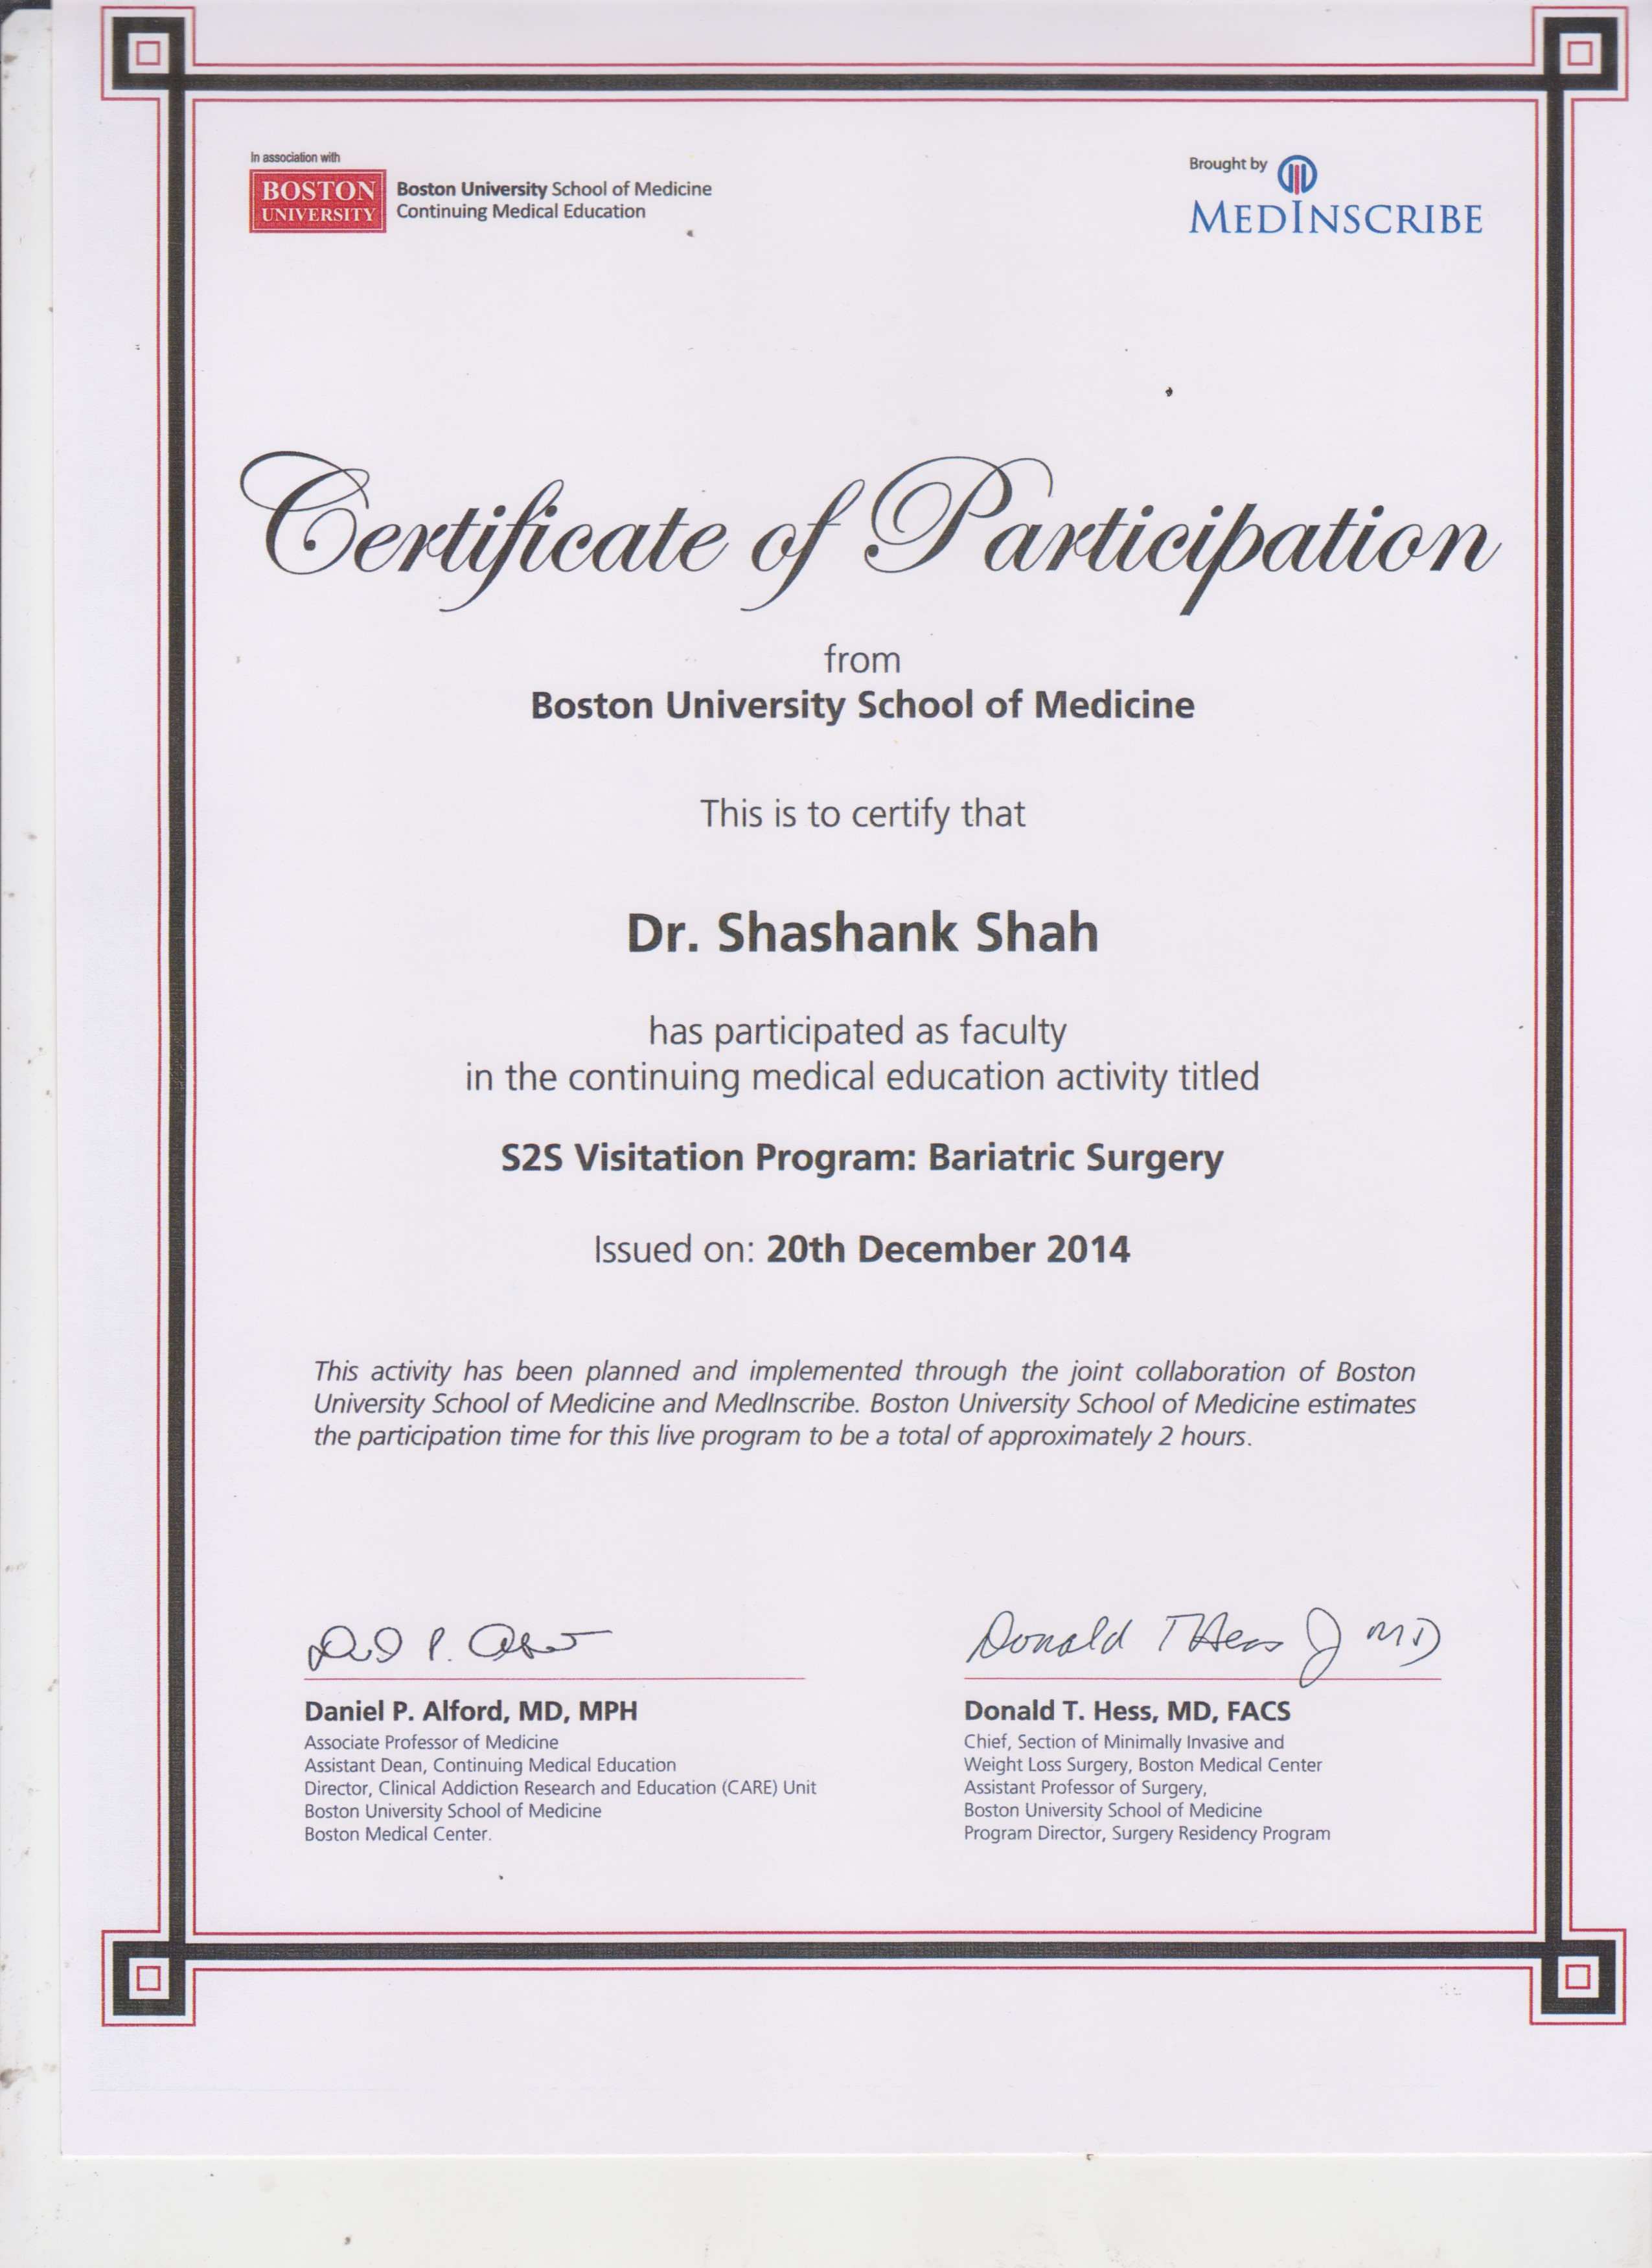 Certificate of Participation as a Faculty at the Boston University School of Medicine’s continuing medical education activity titled Bariatric Surgery in the year 2014. 